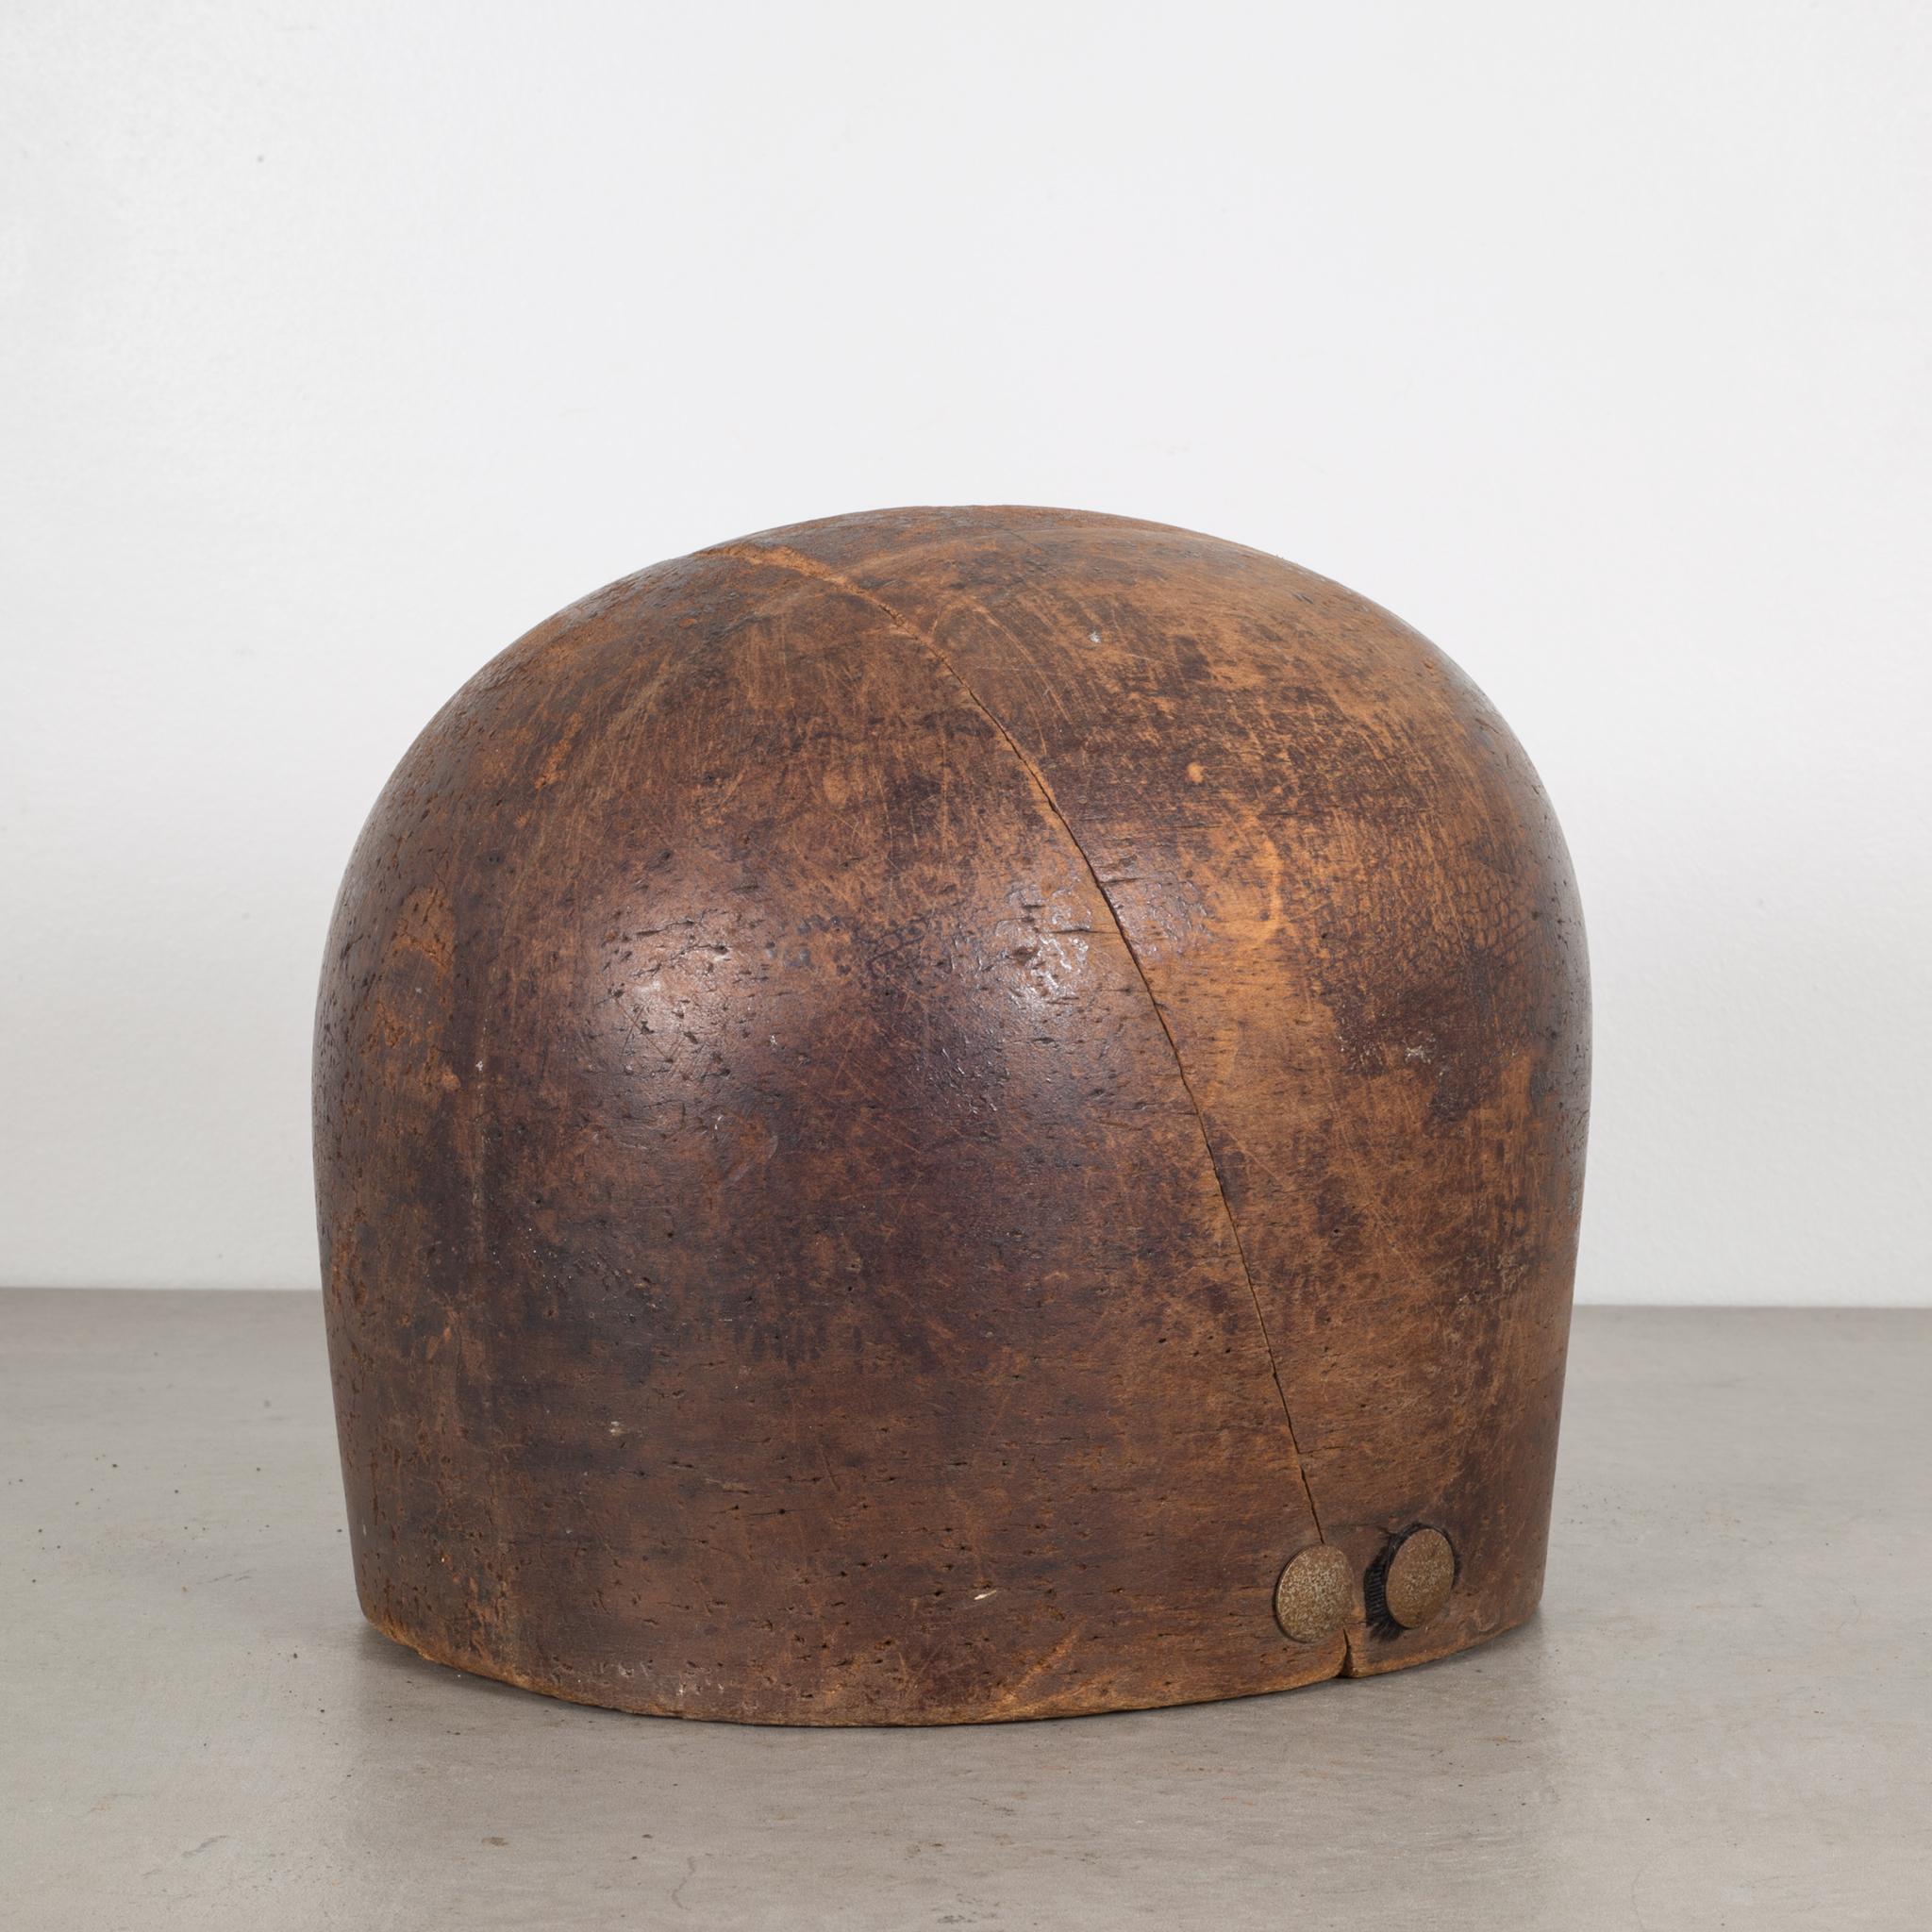 About

This is an original wooden hat mold/millinery hat mold and is removable from the base. This piece has retained its original finish and has the appropriate patina consistent with age and use.

Creator: Unknown.
Date of manufacture: circa